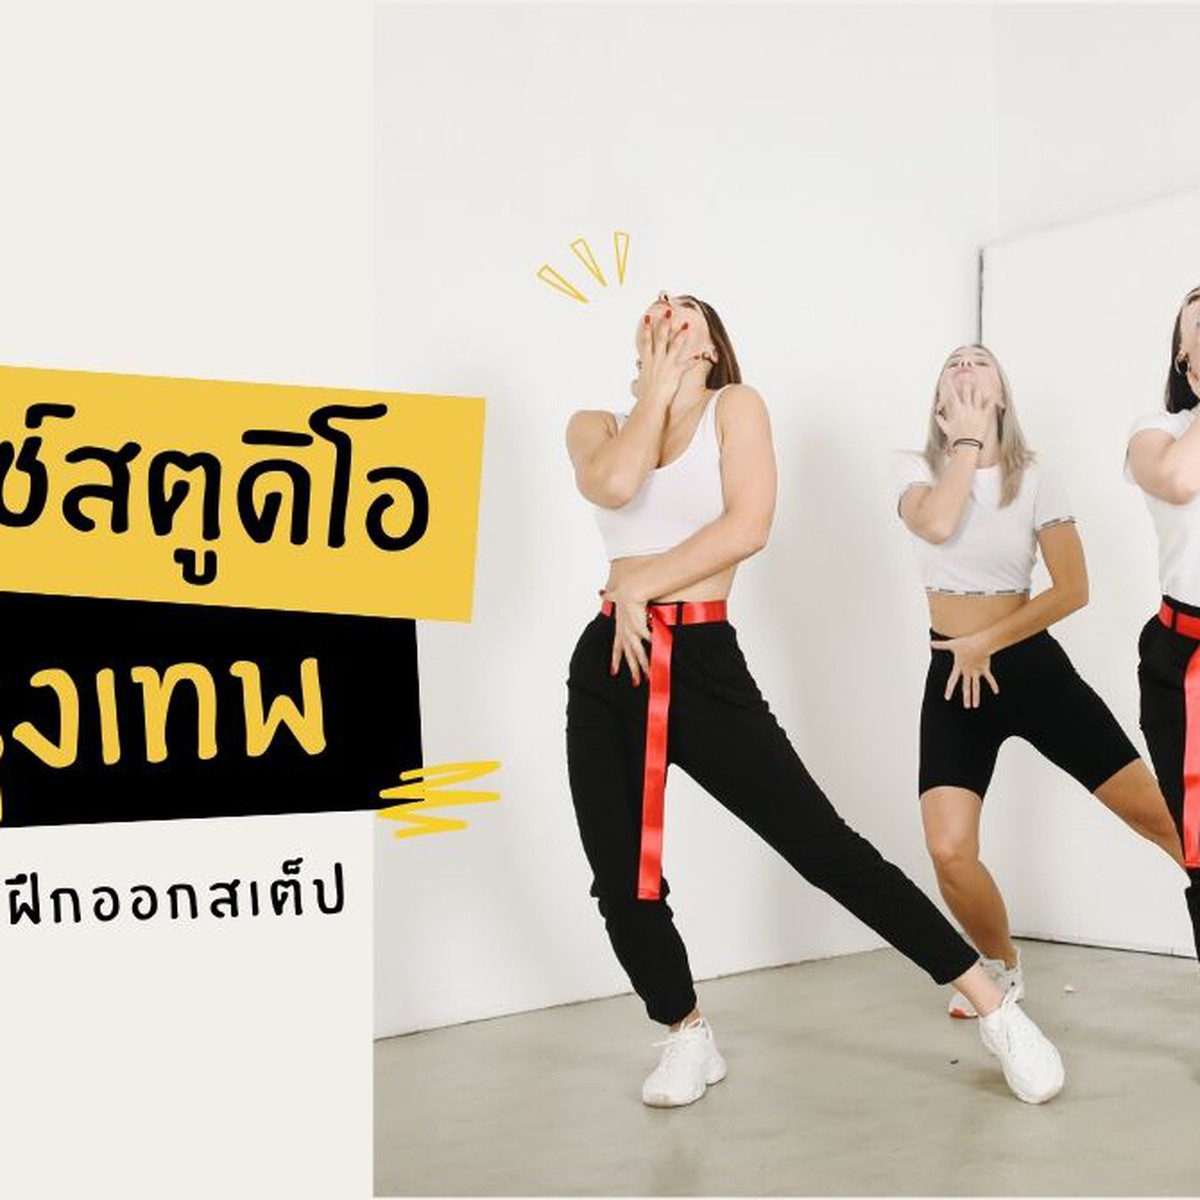 12 Dance Studios in Bangkok That Will Get You Grooving Until You're Fit and  Firm | Siam2nite